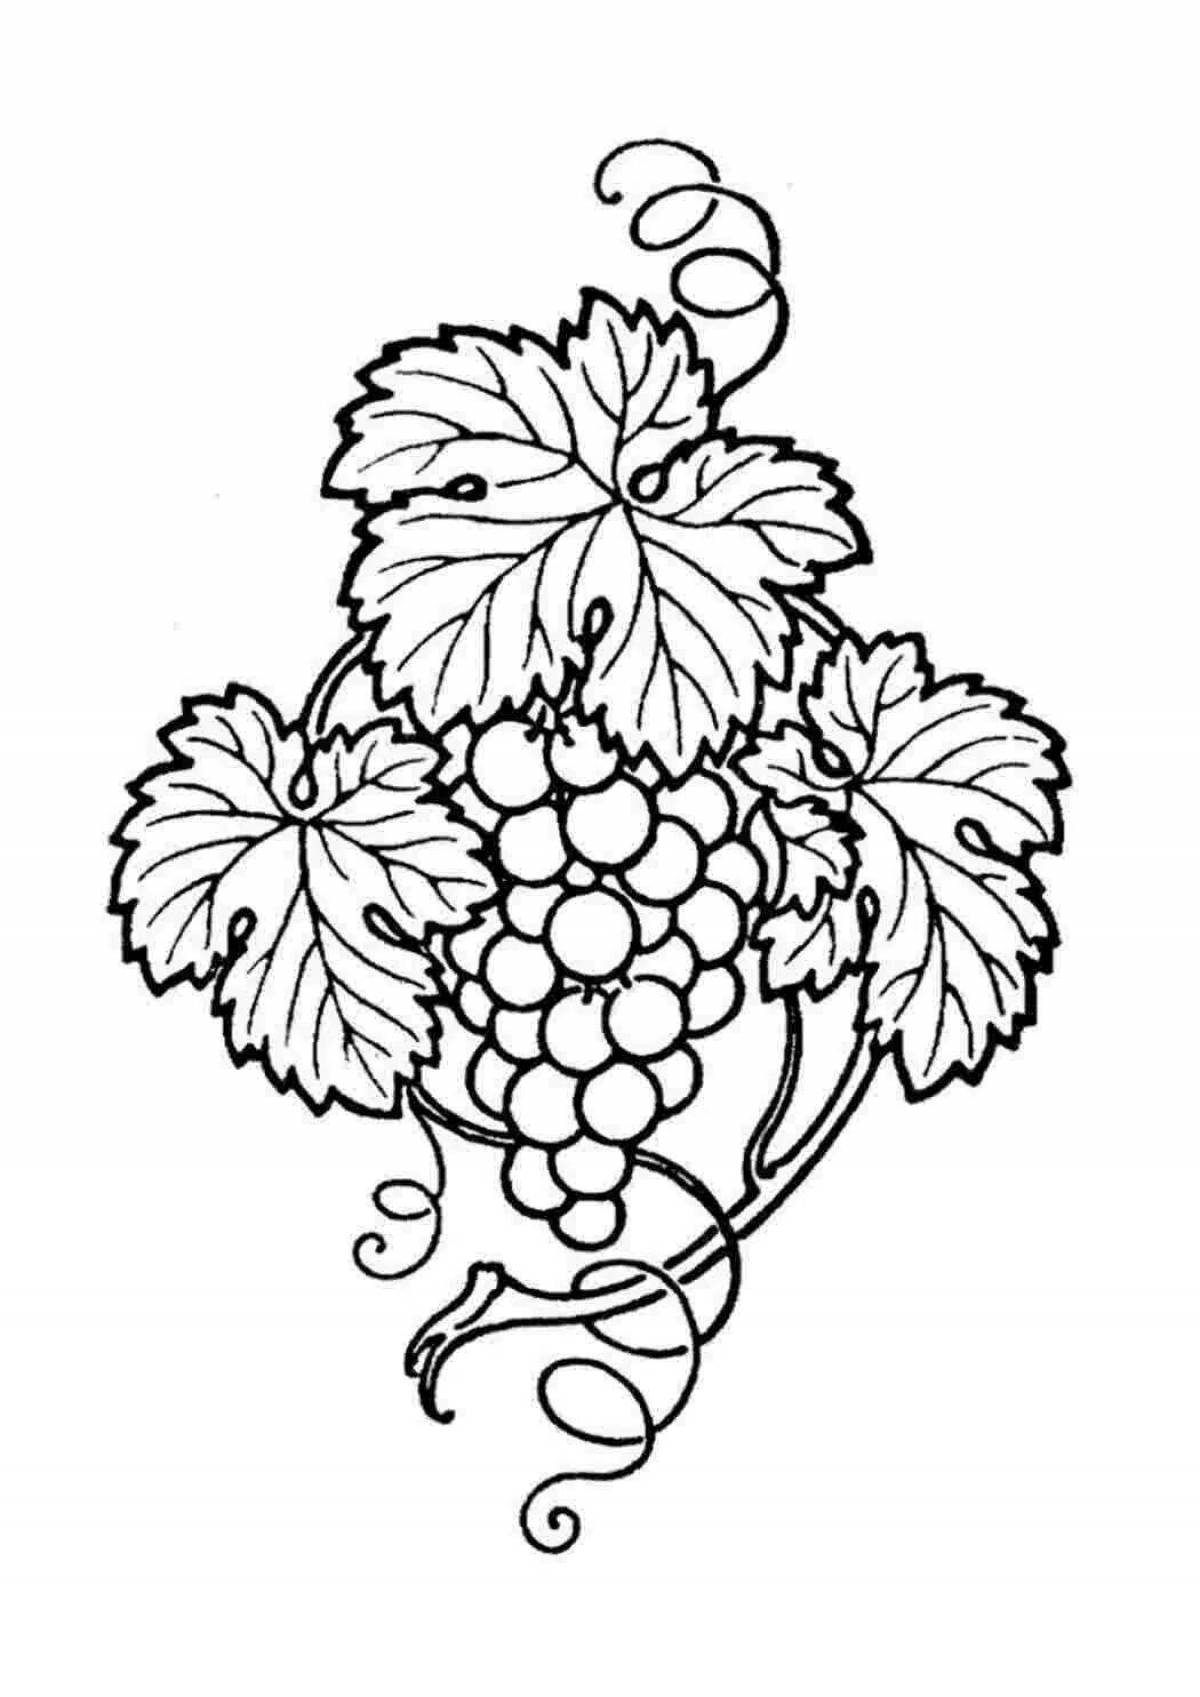 Exalted grape branch coloring page